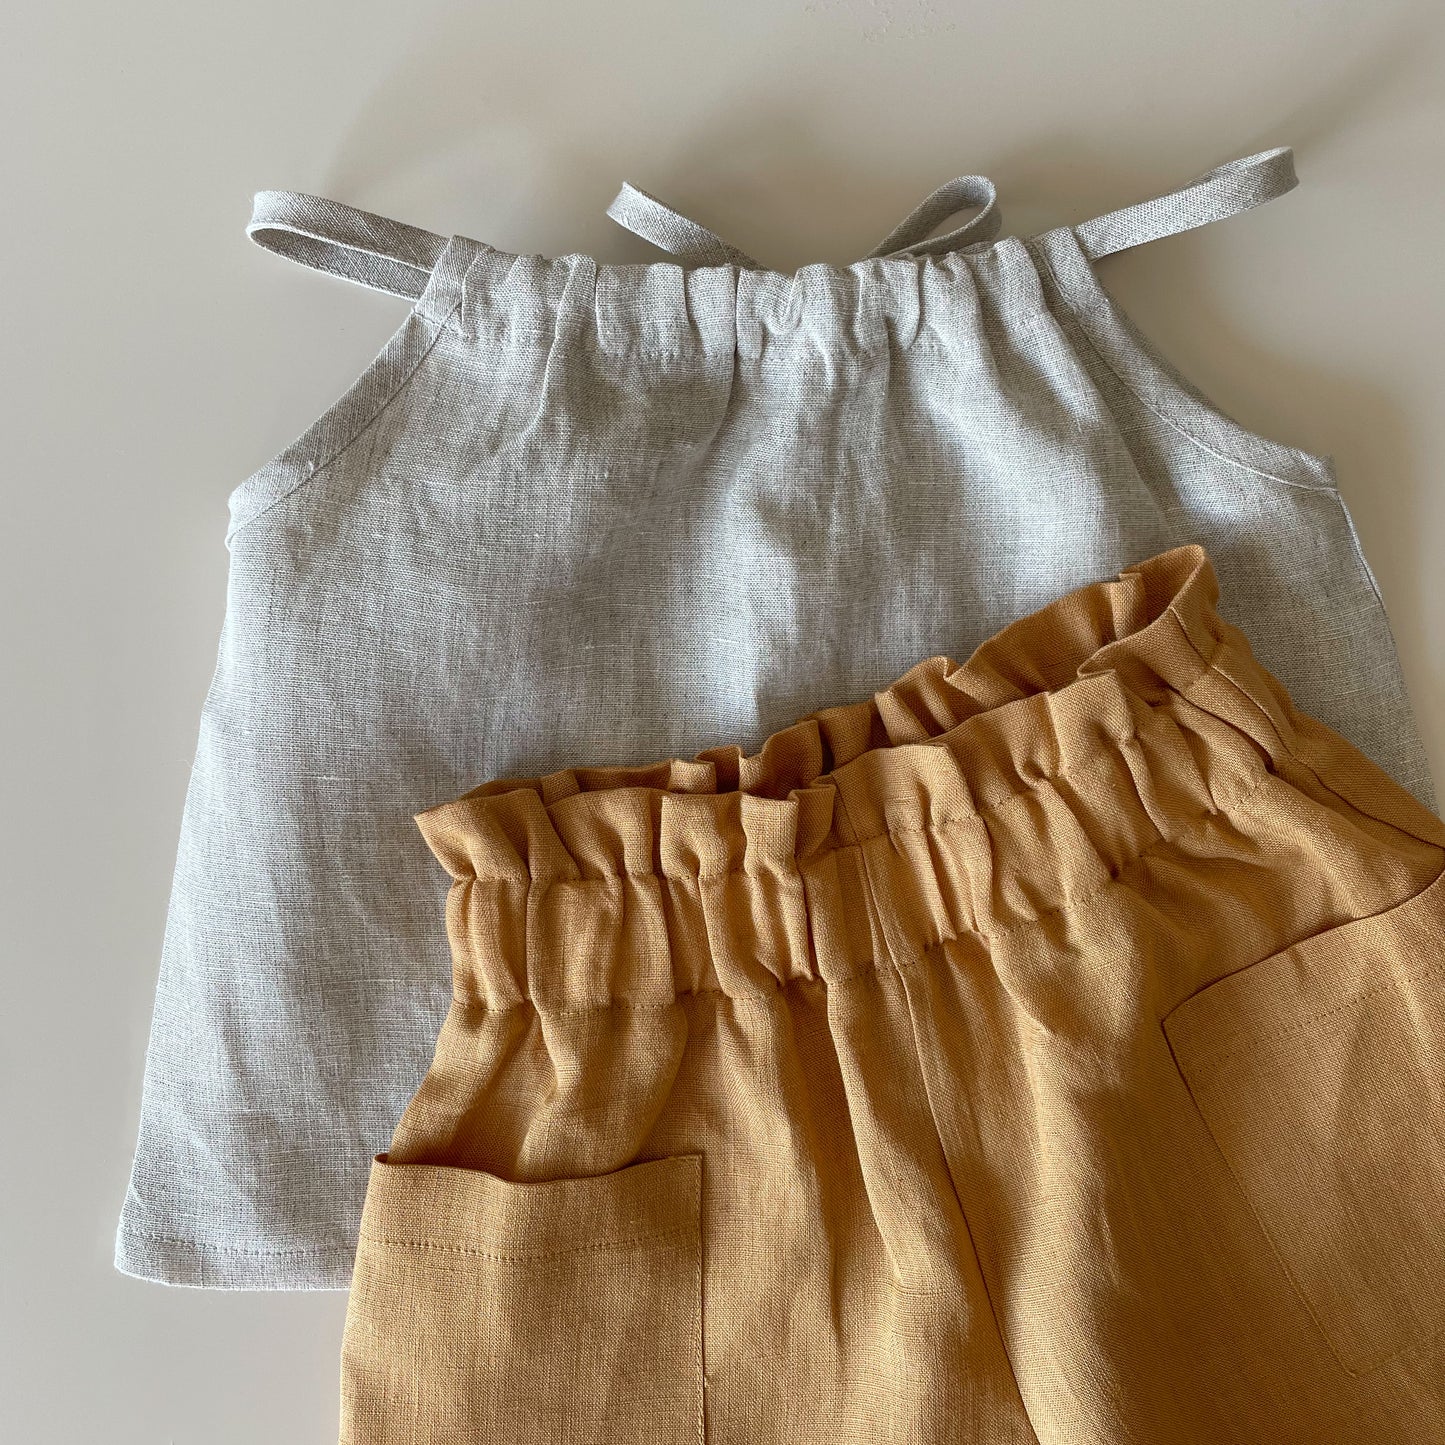 Strap top with tie in linen - girl 1-6y | natural